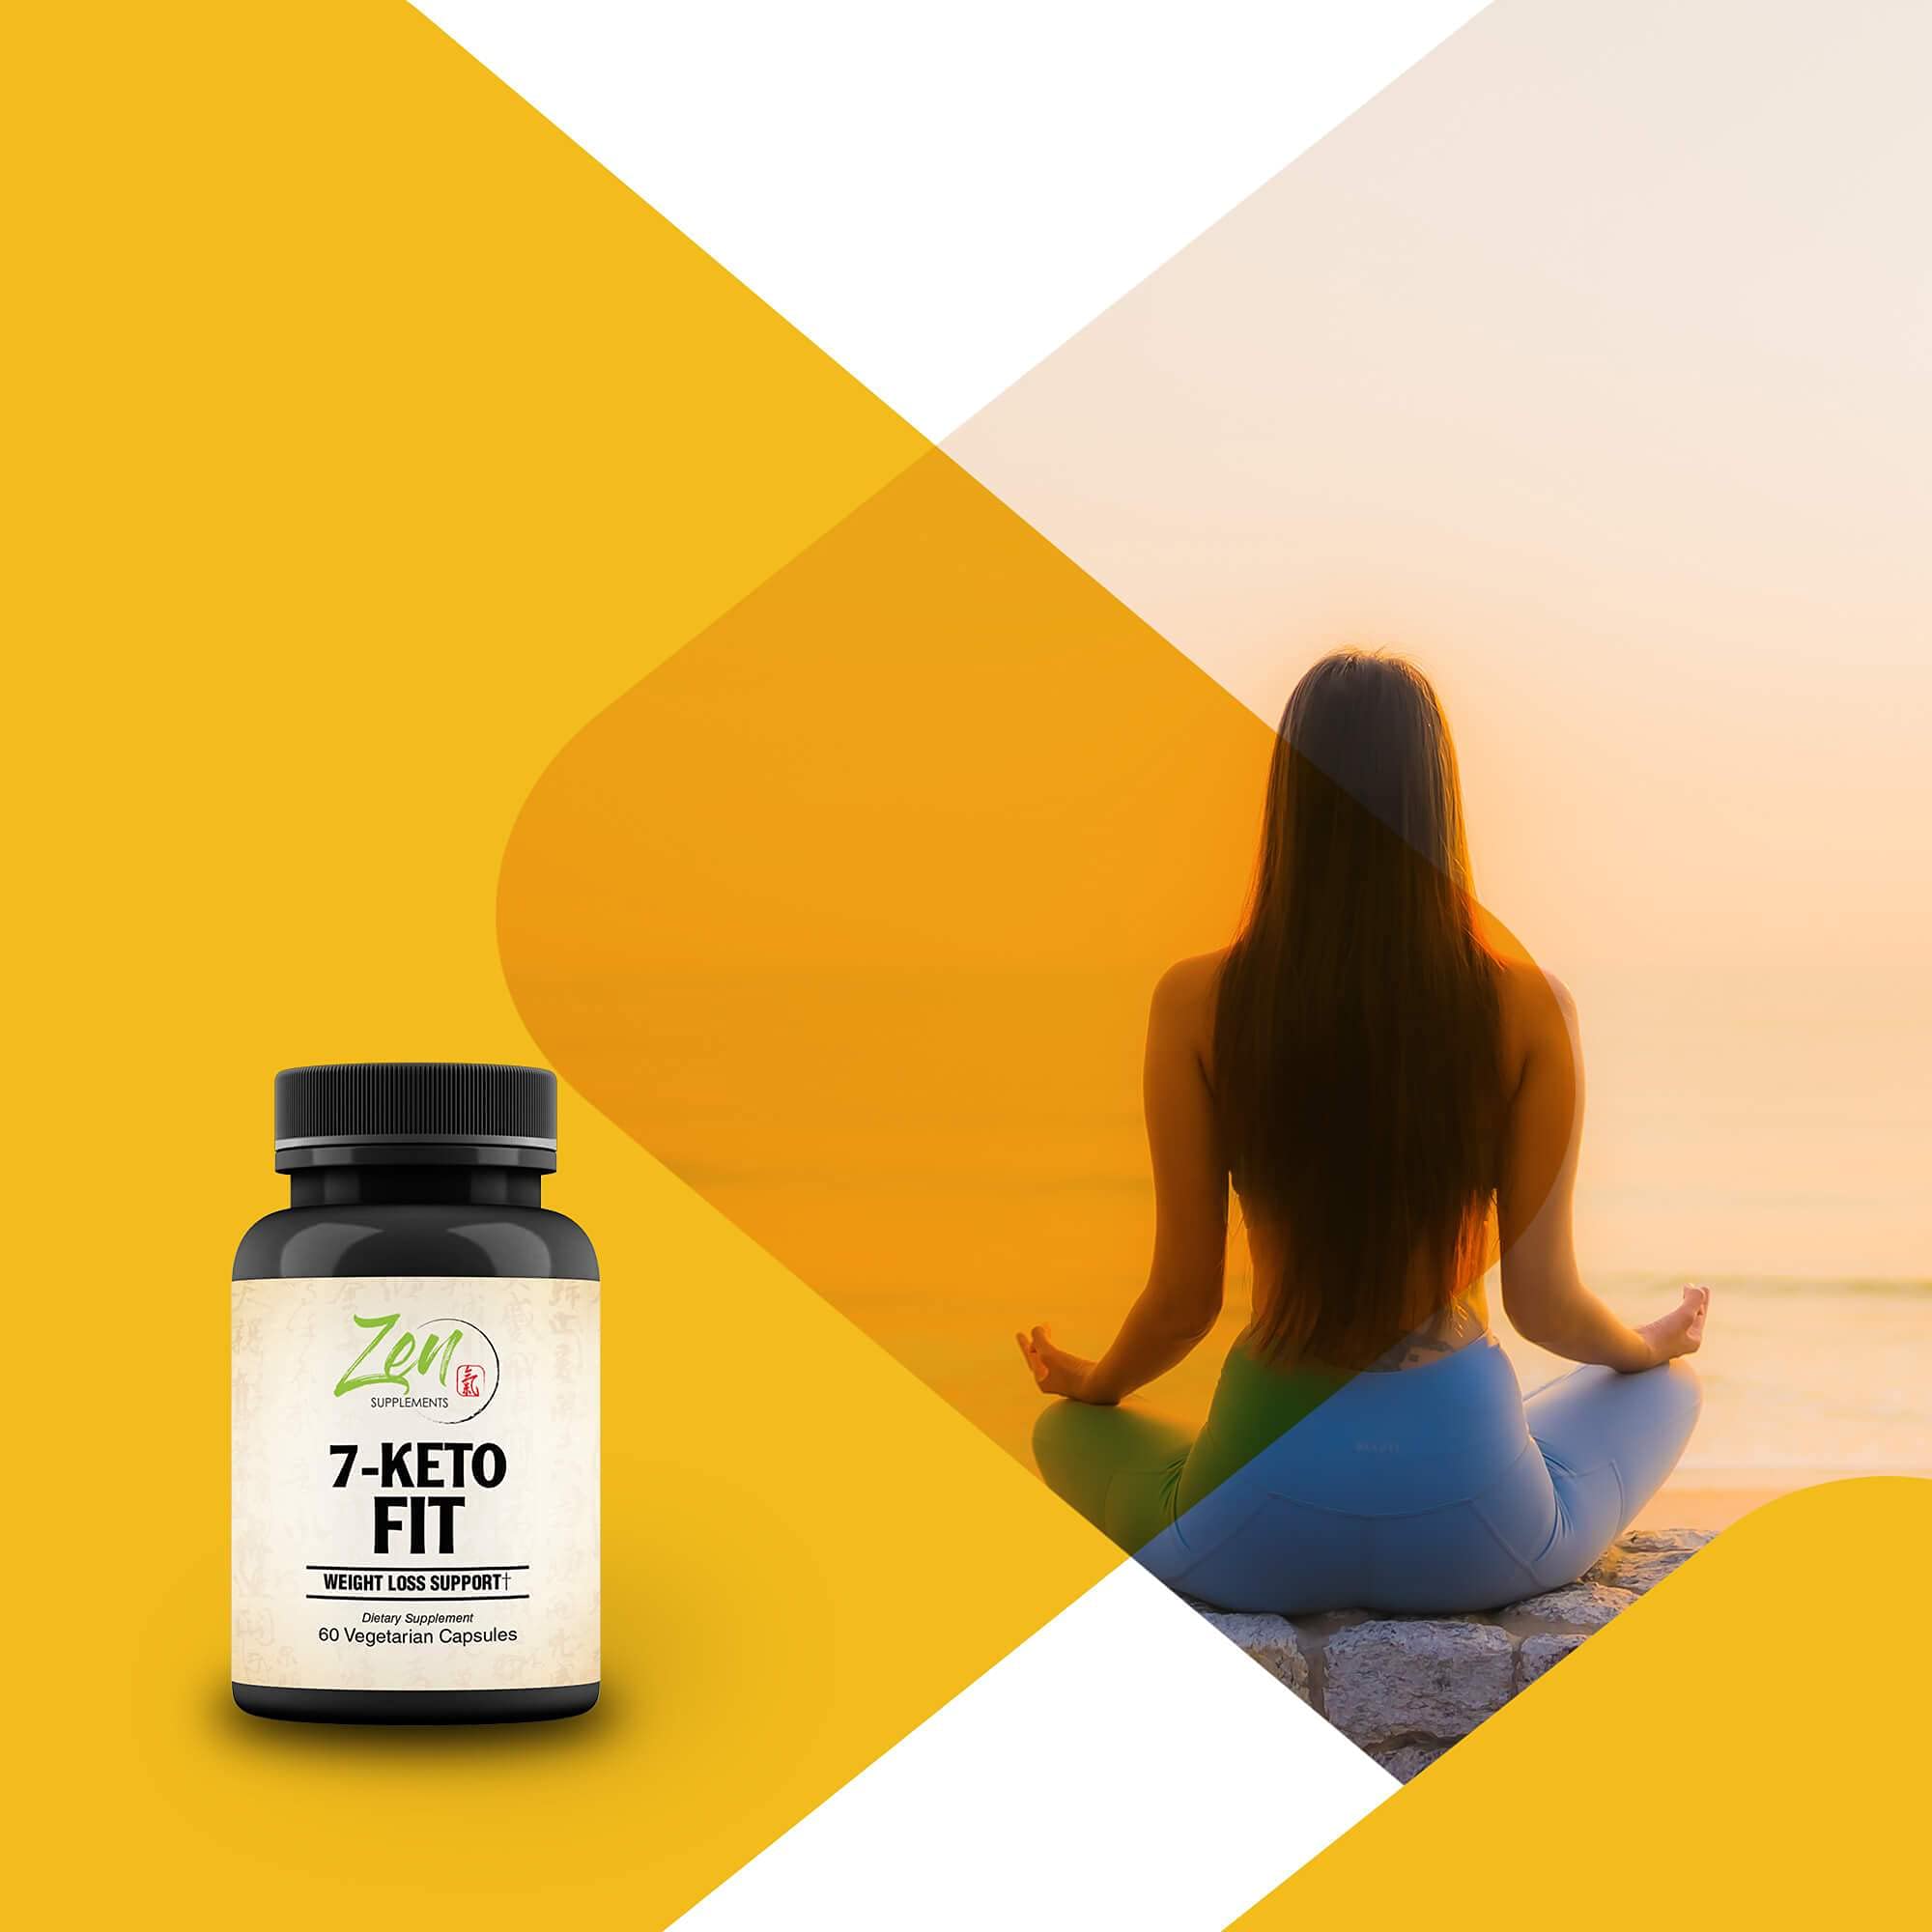 Zen Supplements - Hi Potency CLA 1,250Mg - Supports Healthy Weight Management - Promotes Lean Mass Muscles, Metabolism & Immune Health 90-Softgel